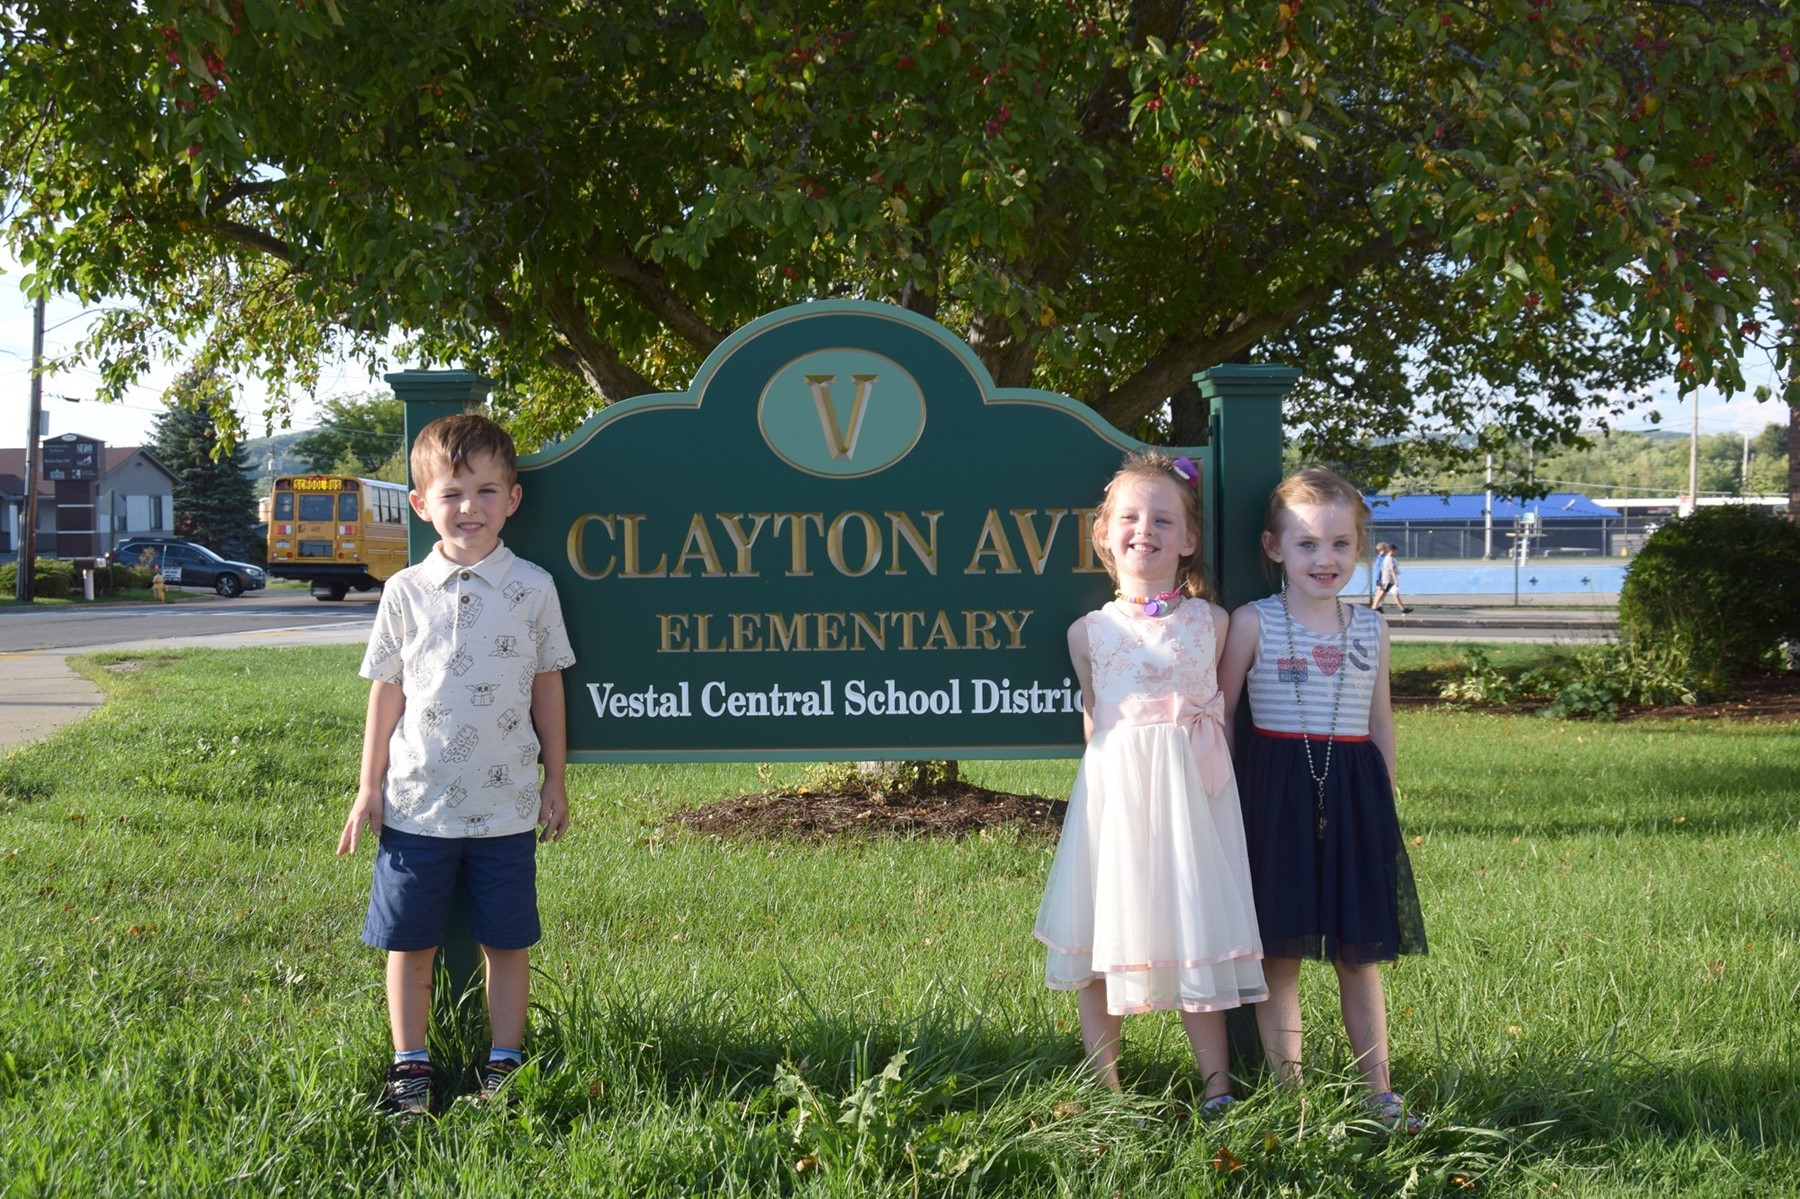 Three Clayton Avenue Elementary Kindergarten students, a boy and two girls, flank the sign outside the building during Kindergarten Orientation.